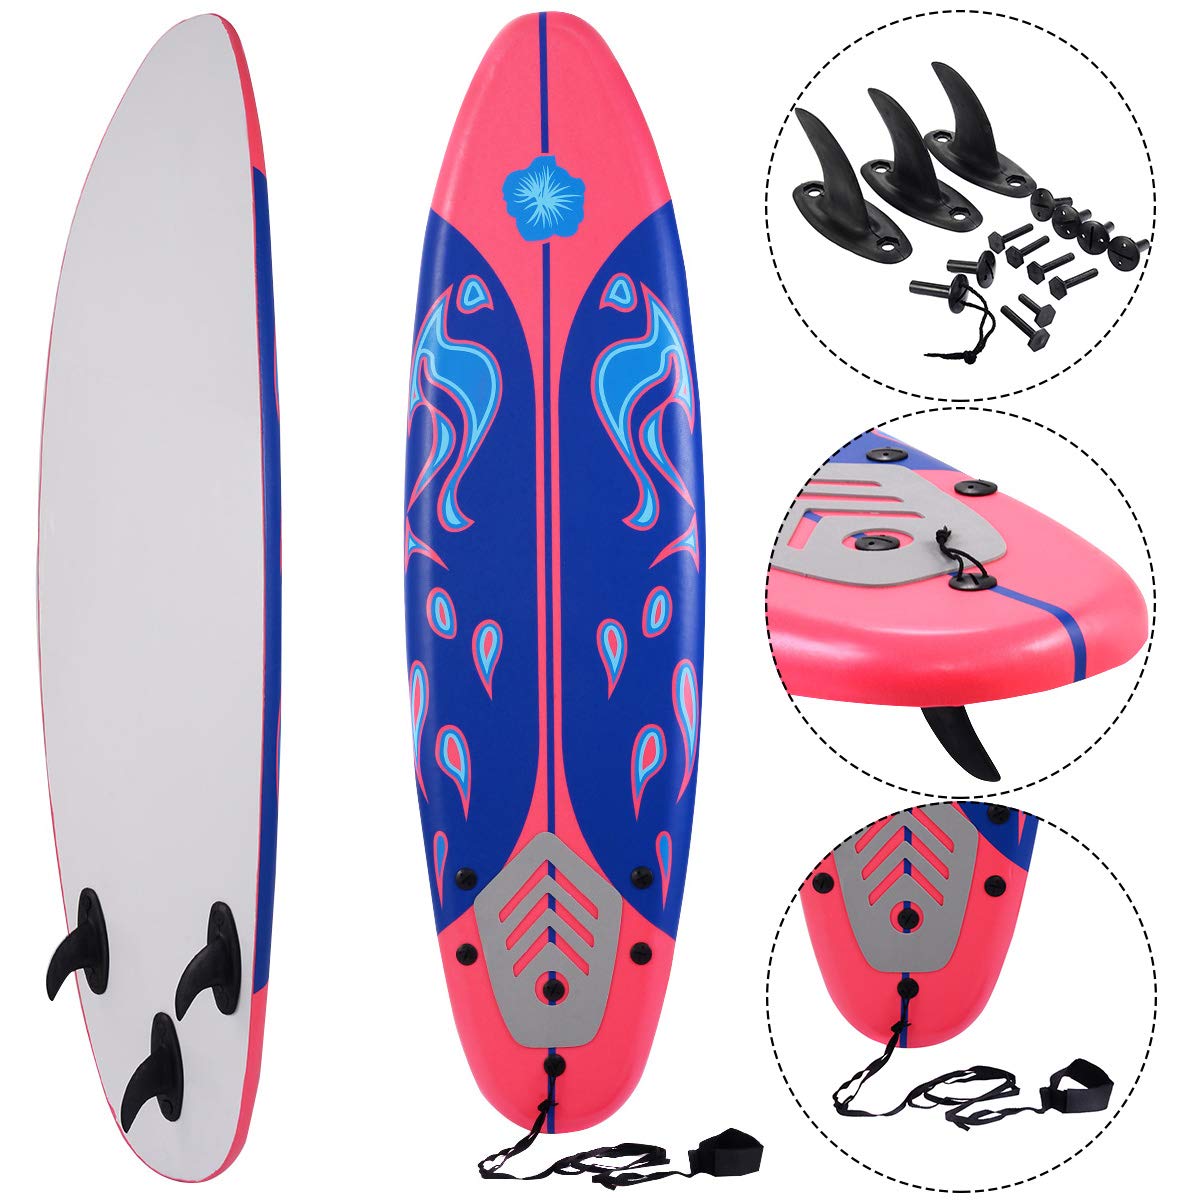 Giantex 6' Surfboard Surfing Surf Beach Ocean Body Foamie Board with Removable Fins, Great Beginner Board for Kids, Adults and Children